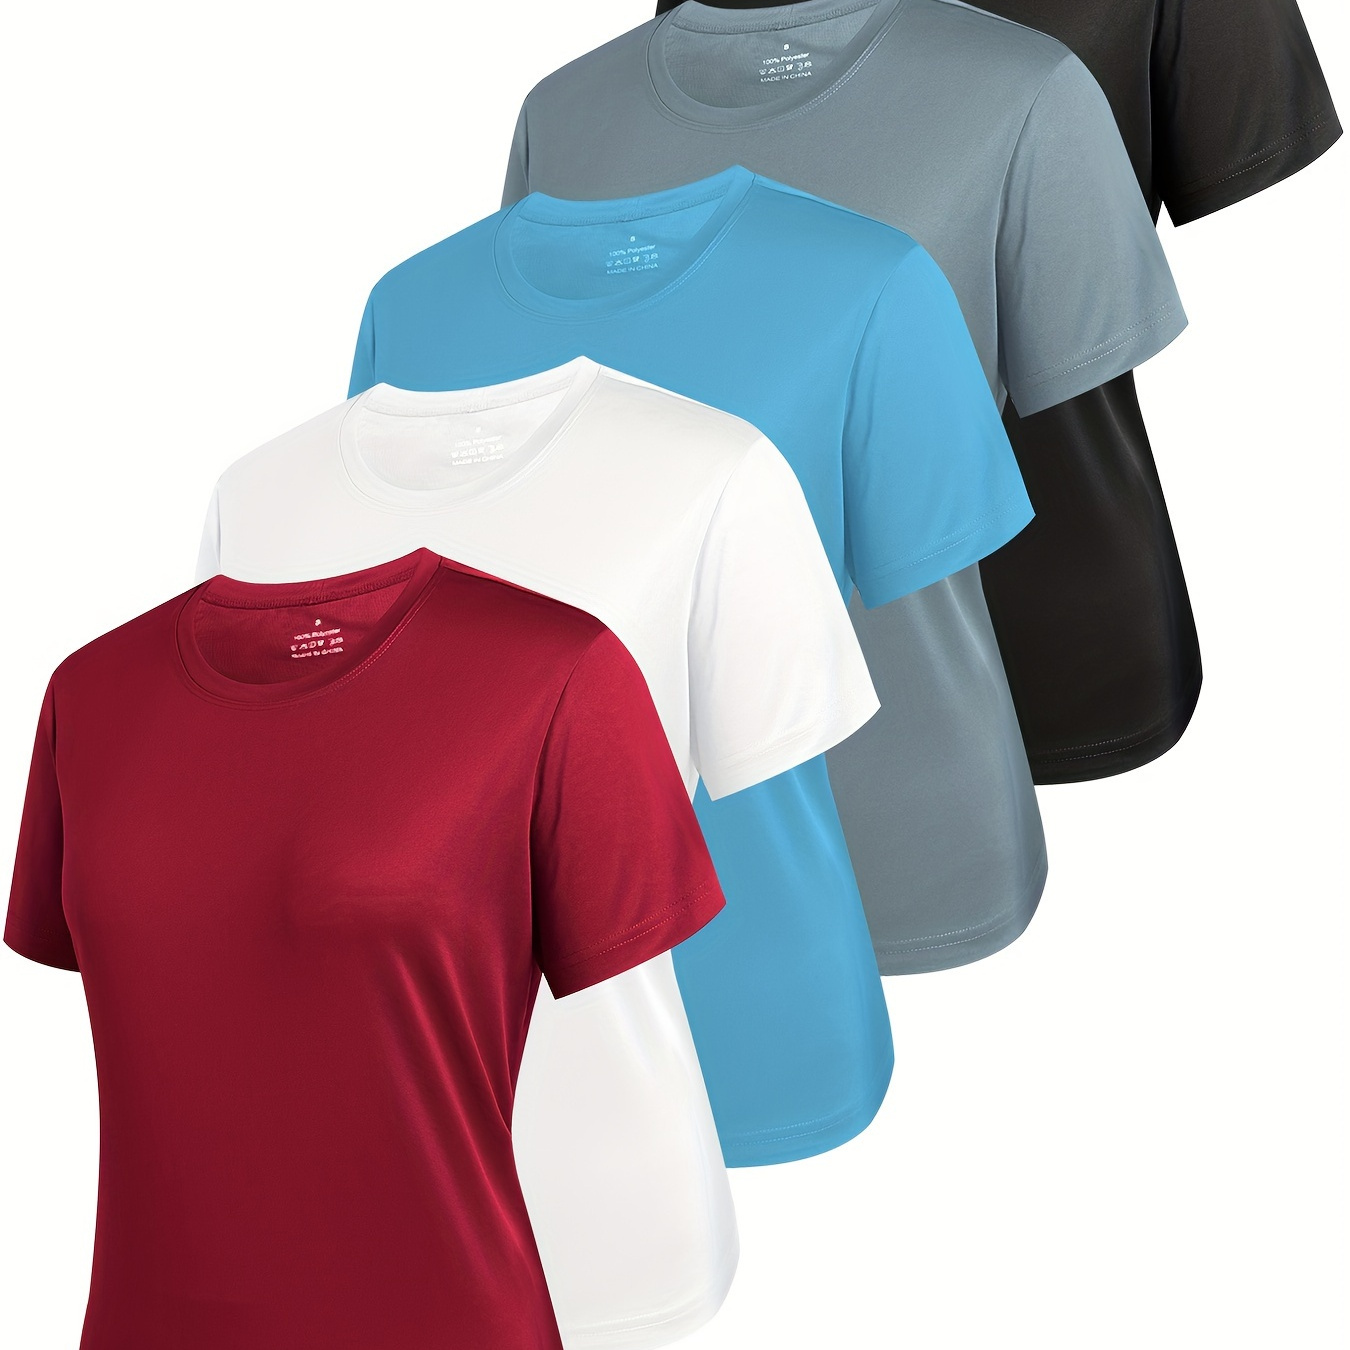 

5 Pack Workout Shirts For Women Short Sleeve Athletic Active Tops Quick Dry Crew Neck T Shirt For Running Tennis